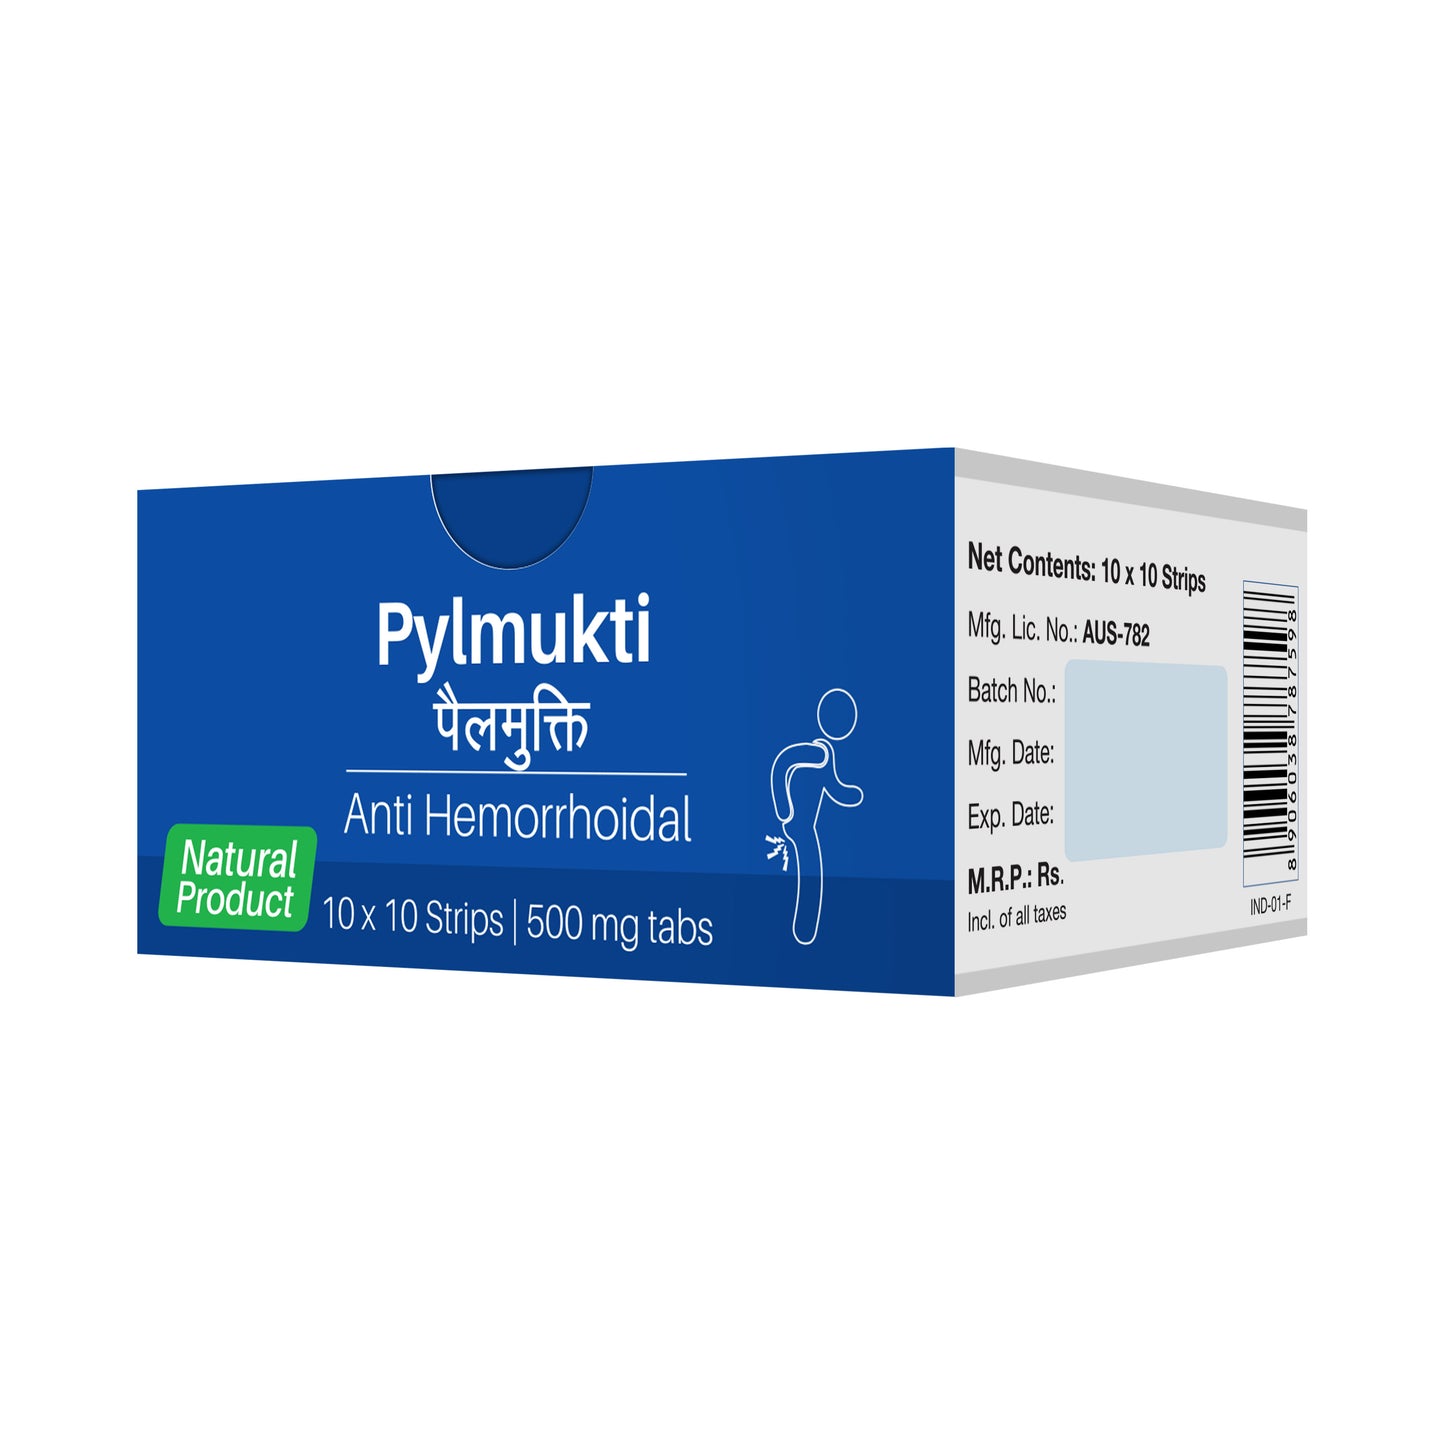 Pylmukti Tablet - Anti-Hemorrhoidal | To Overcome The Associated Pain, Sores, Itching & Bleeding In Piles & Fissures | Natural Product |500 mg